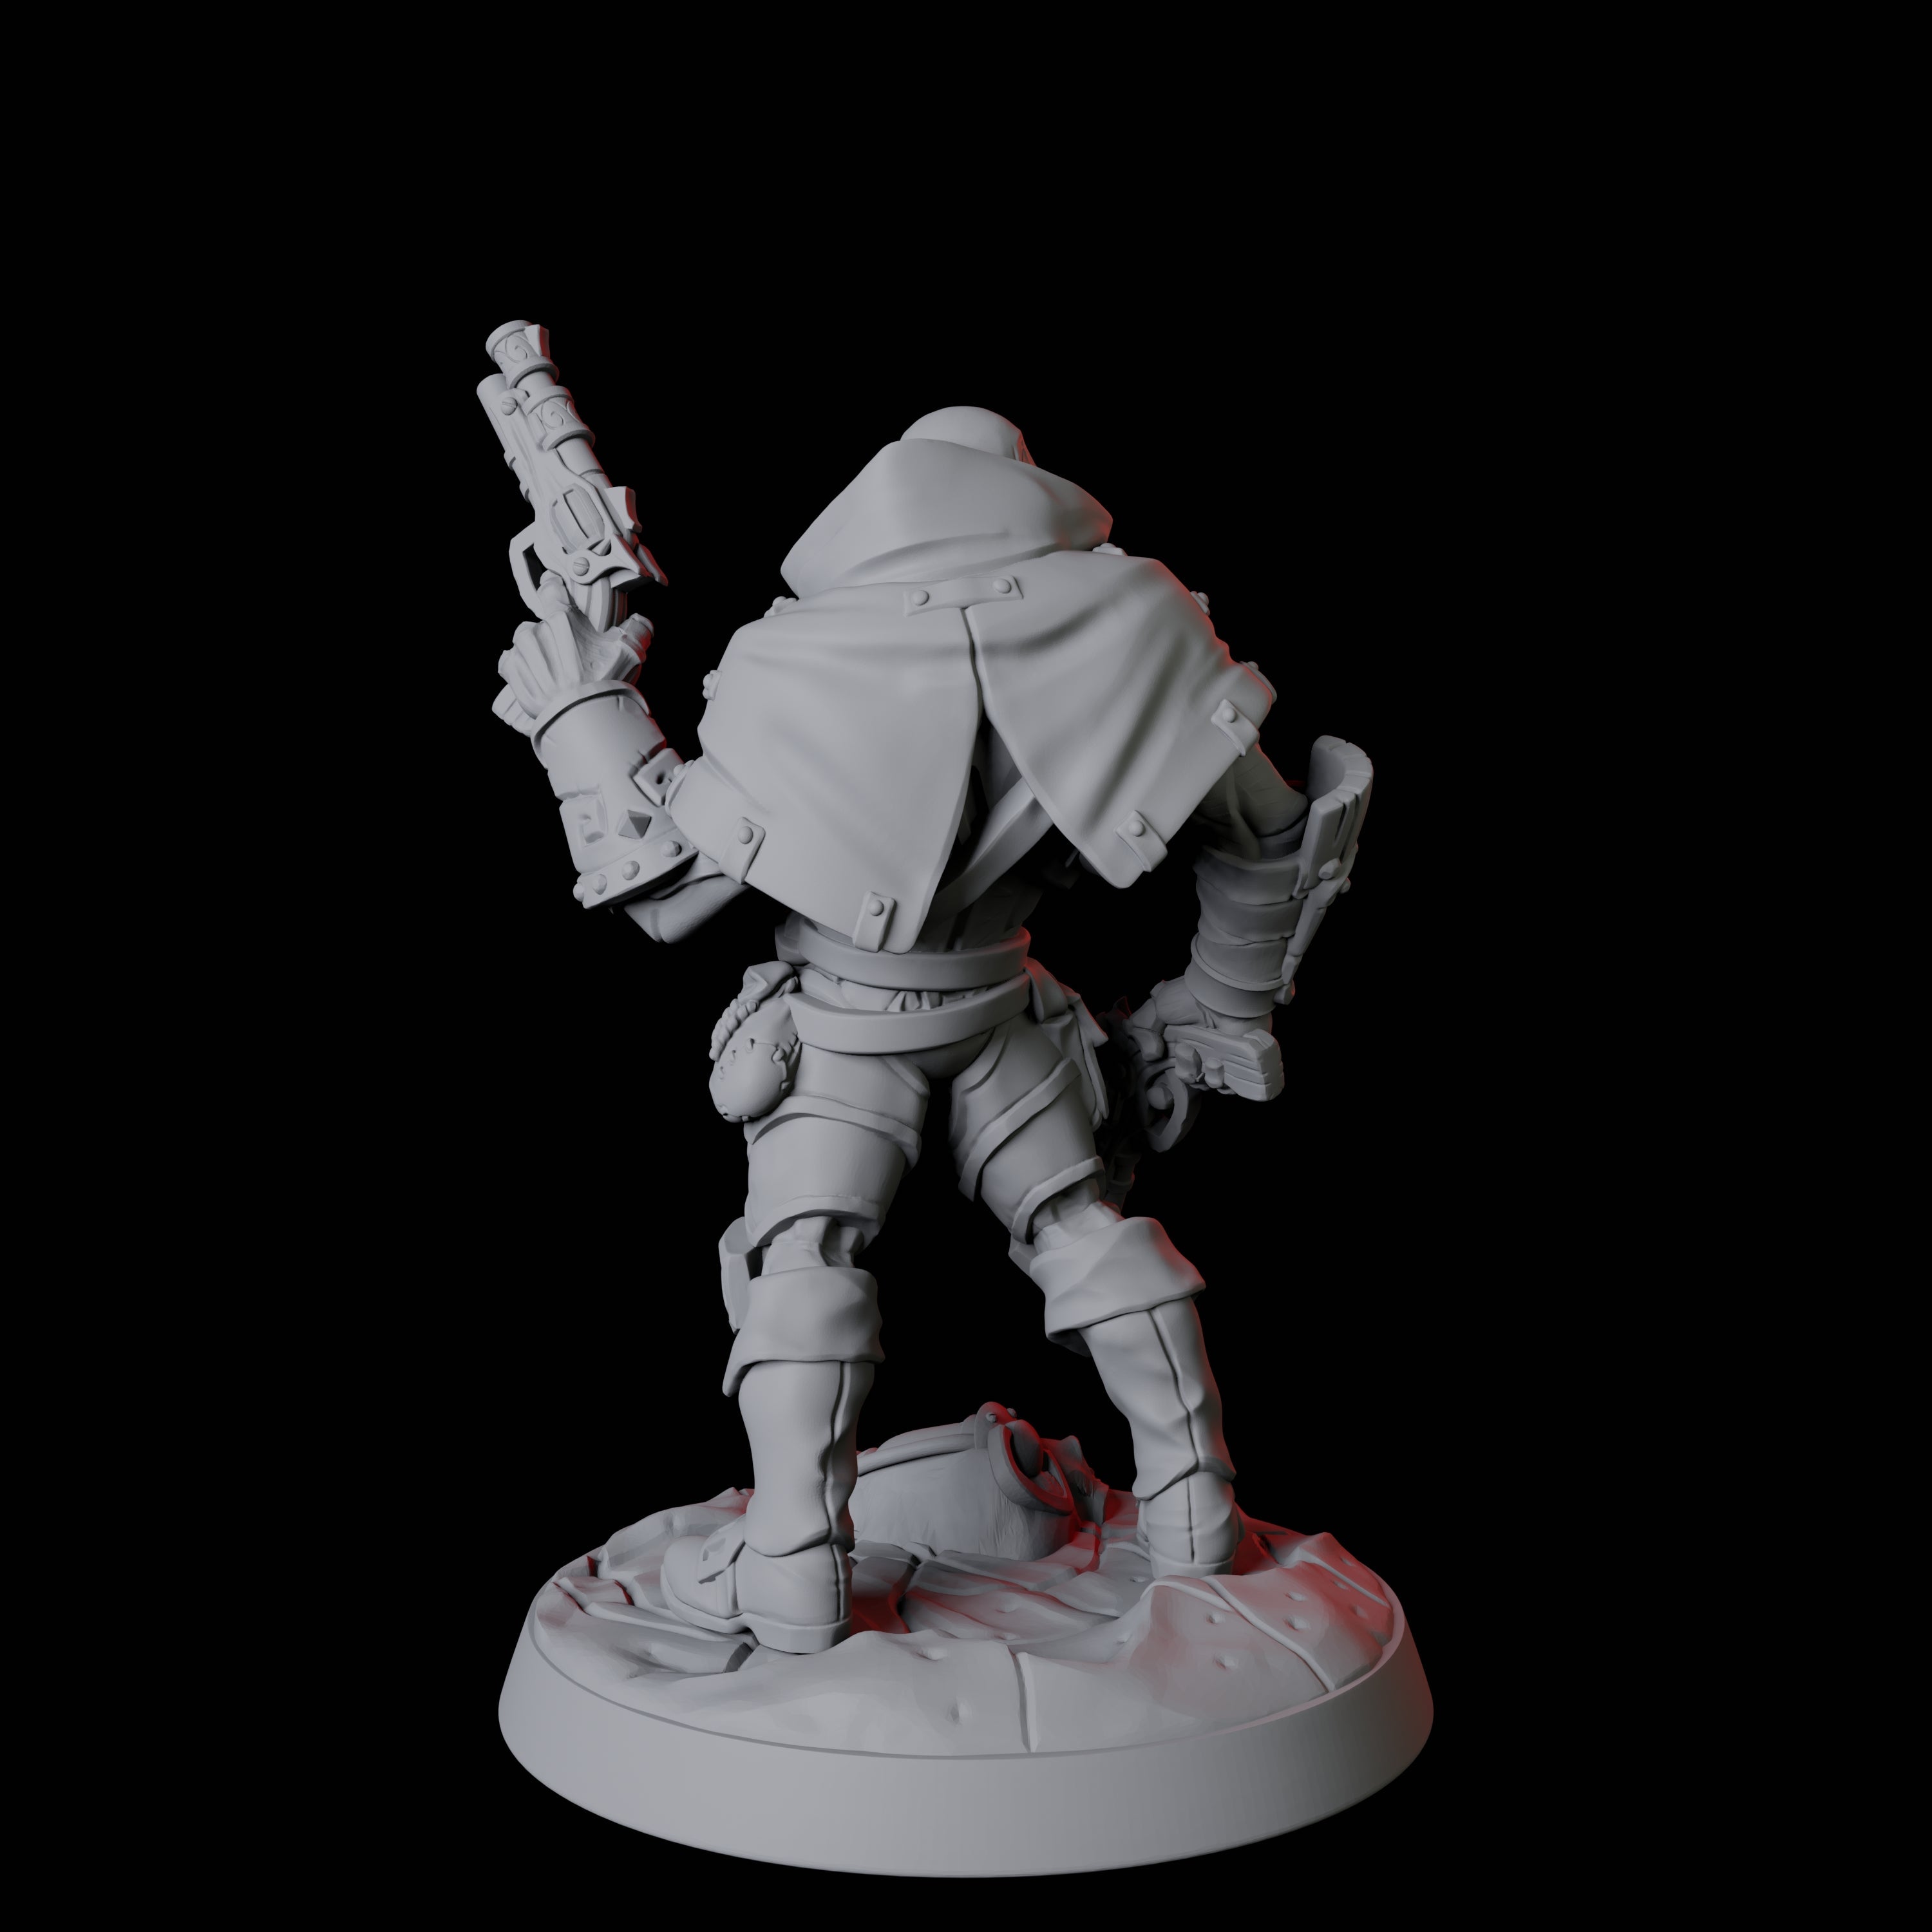 Warforged Gunslinger Fighter Miniature for Dungeons and Dragons, Pathfinder or other TTRPGs